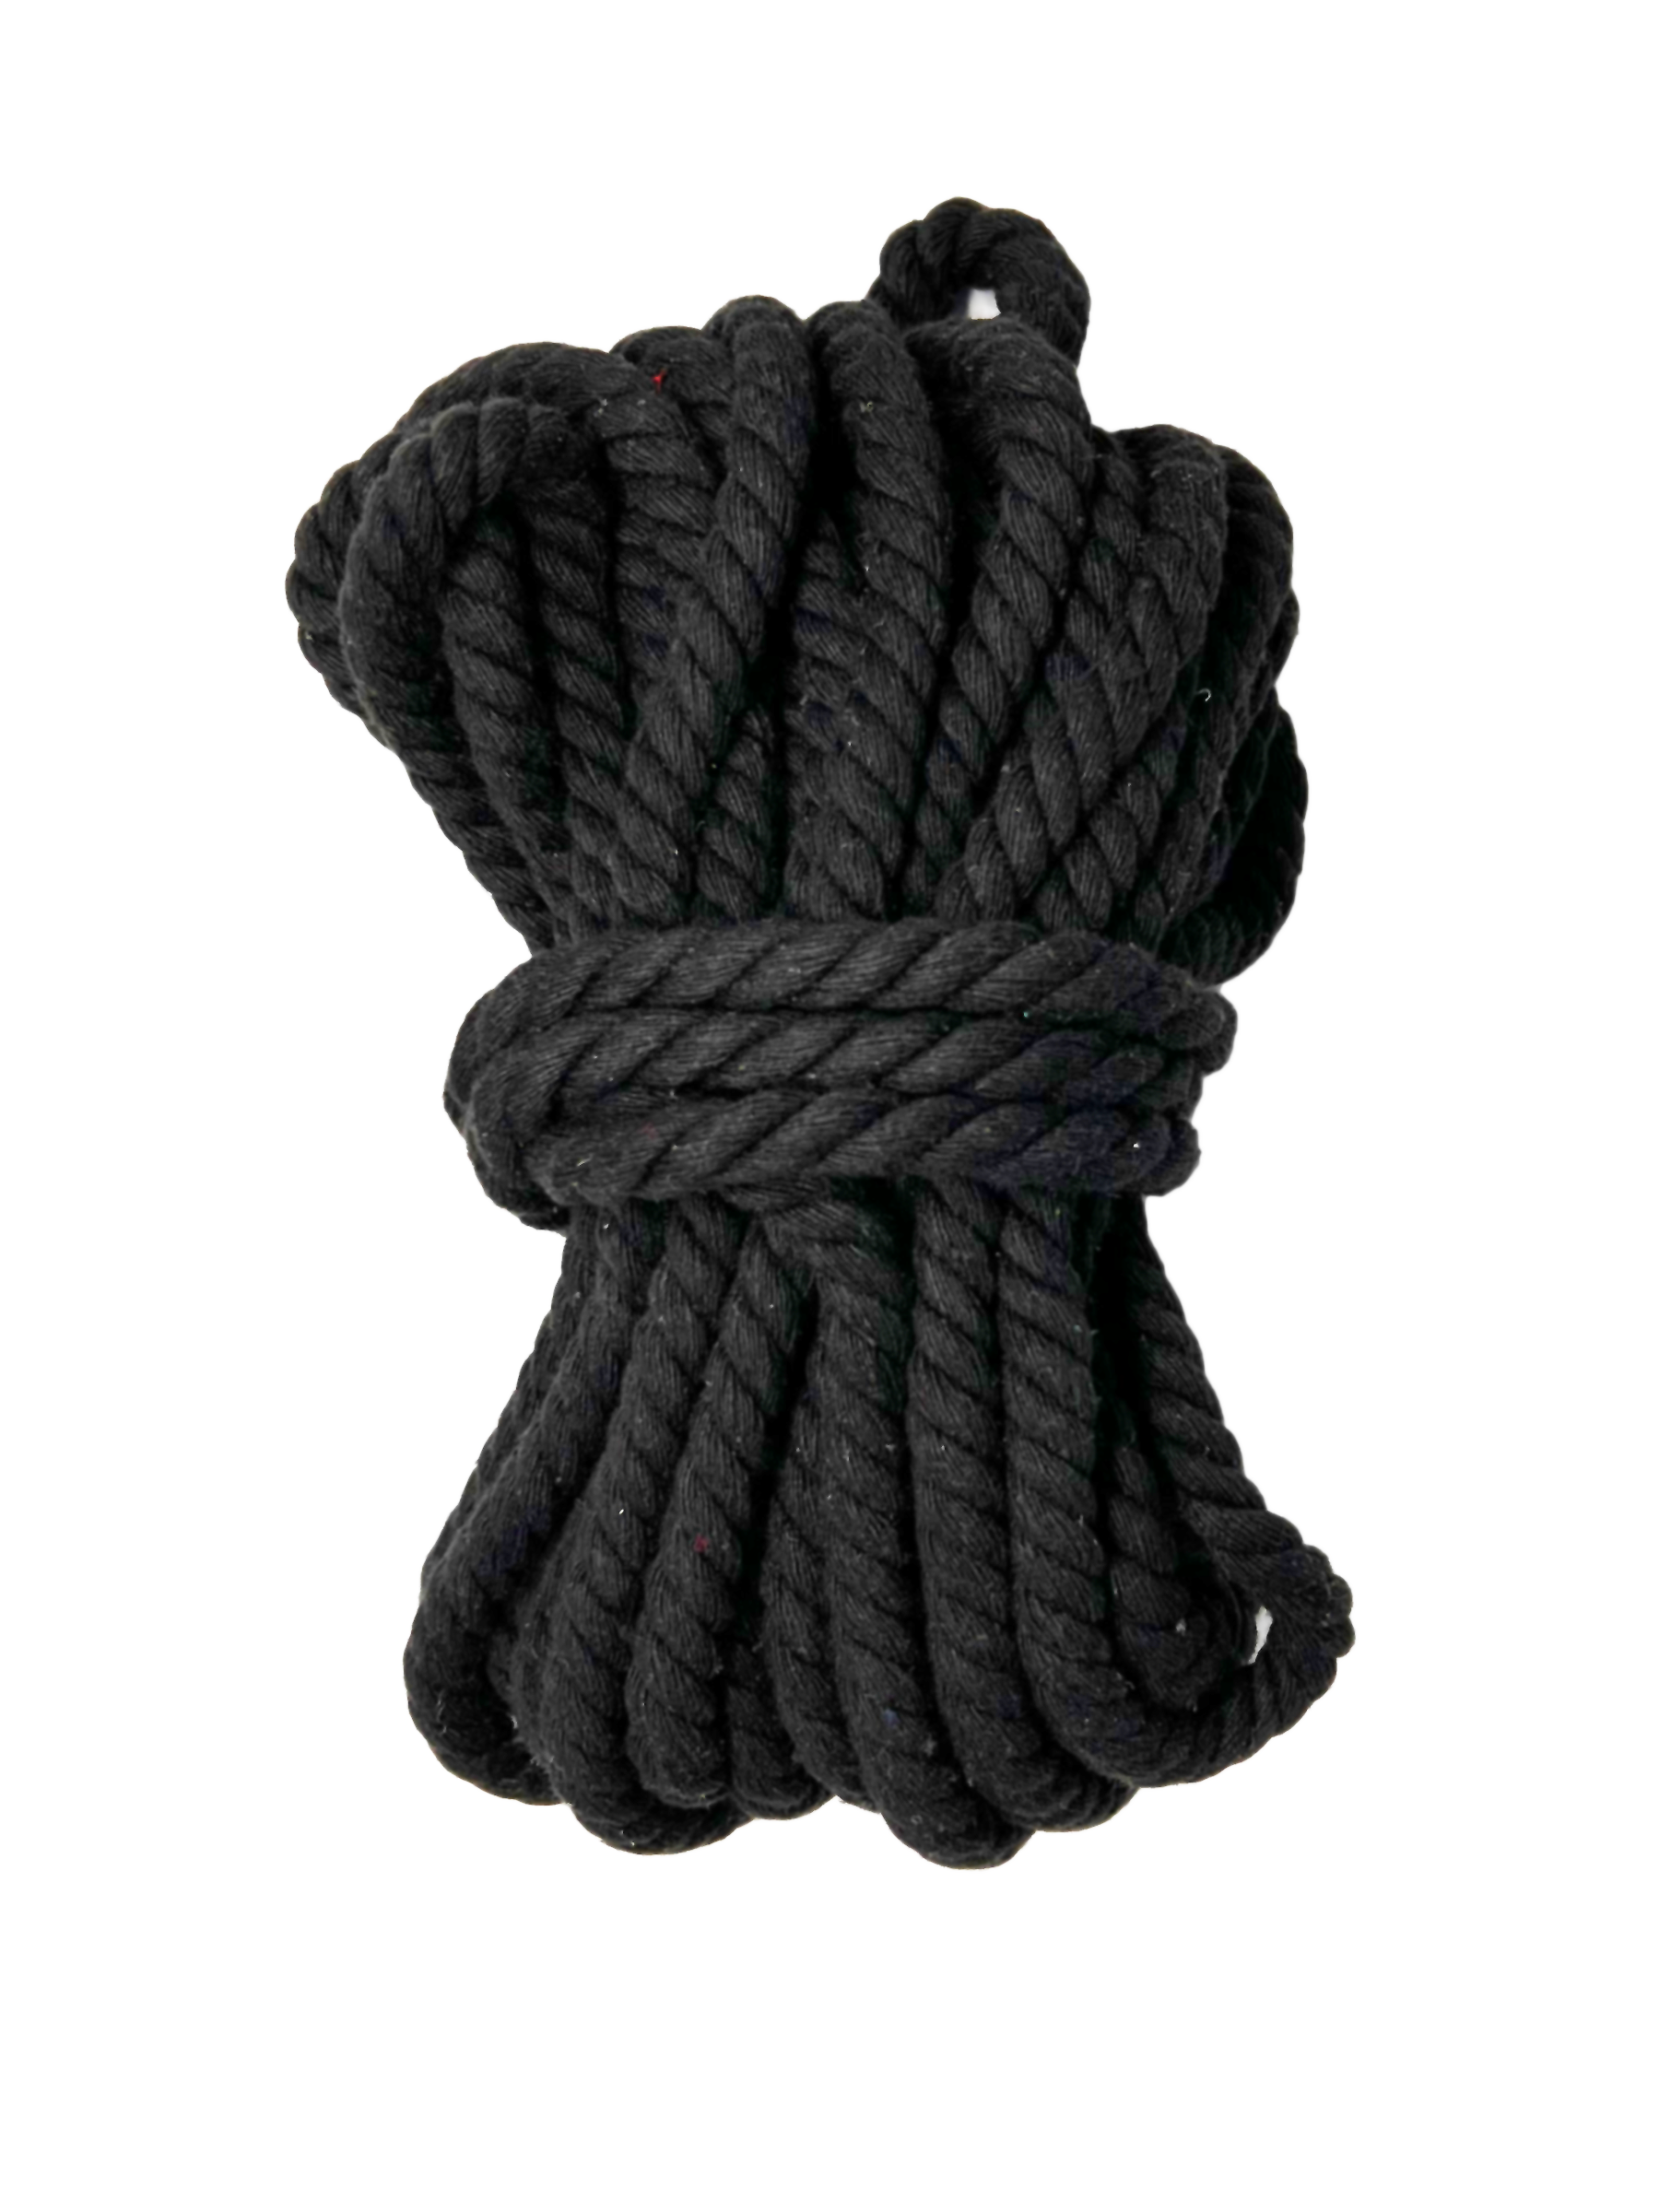 Wholesale rope for bondage Of Various Types On Sale 